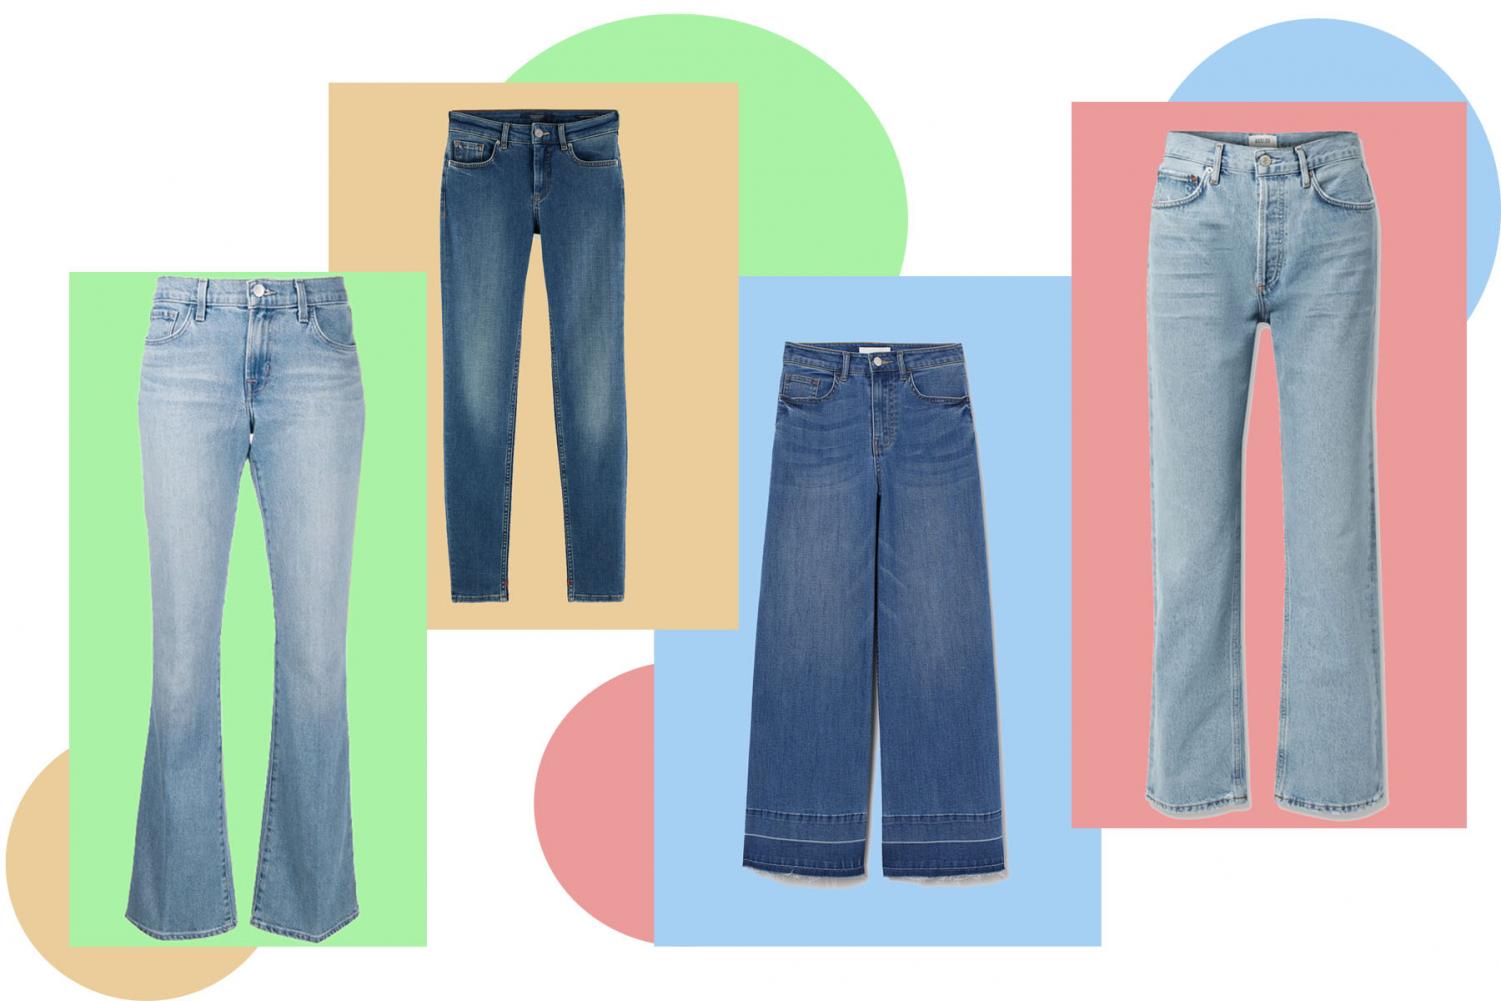 Jean review: Which denim pants are the best and why – High Tide